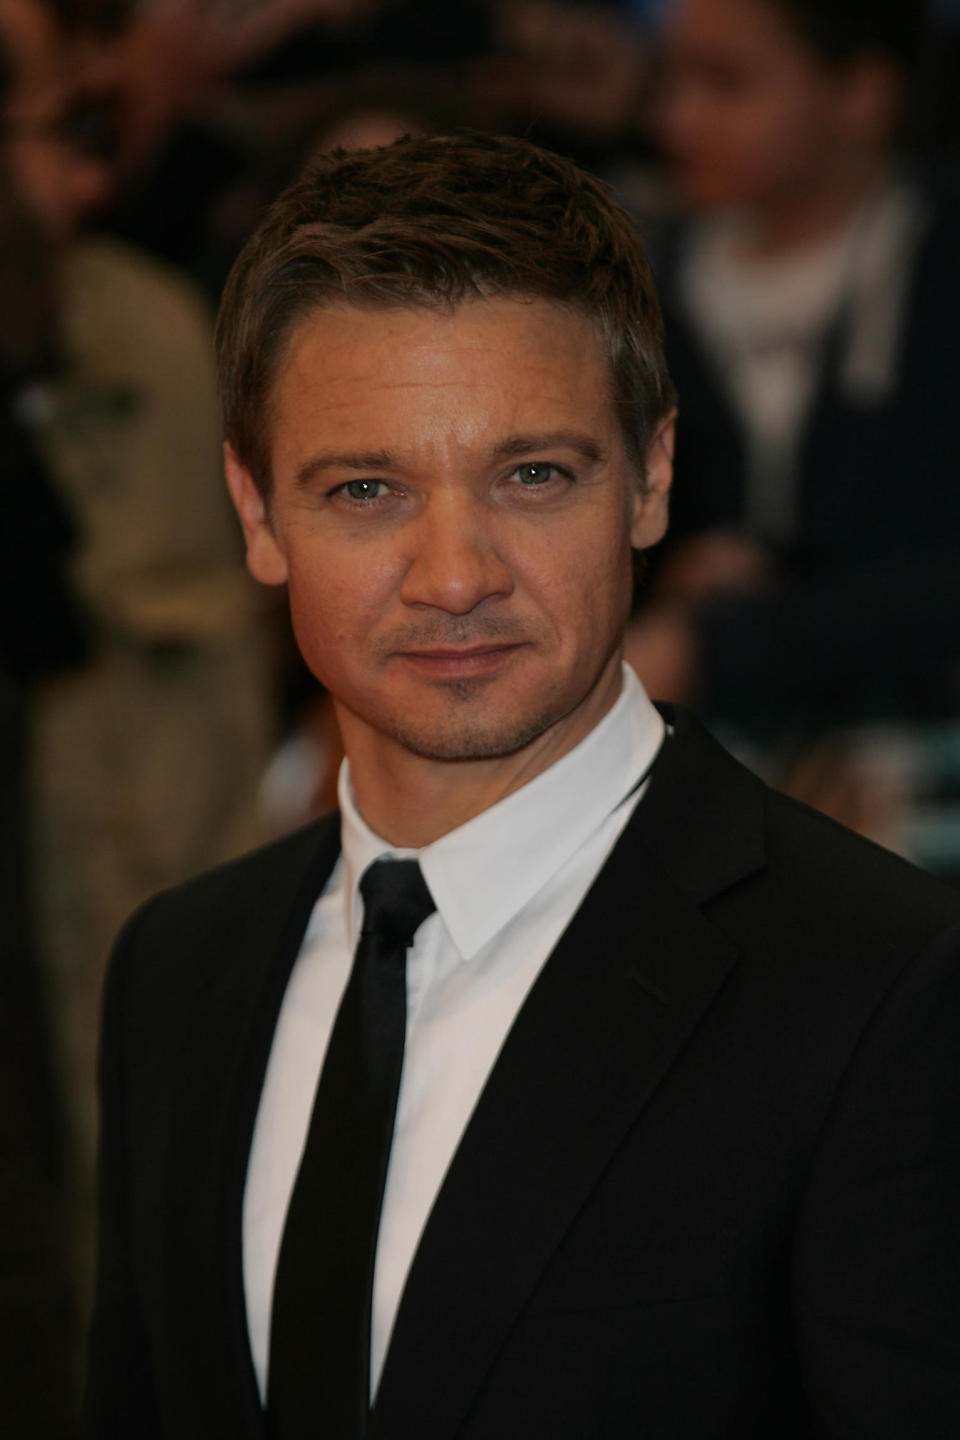 <p>The star of "The Avengers" blasted persistent rumors about his sexuality -- as well as probes into his personal life in general. "I want my personal life to be personal, and it's not f***ing true," Renner, 41,<a href="http://www.huffingtonpost.com/2012/04/04/jeremy-renner-blasts-gay-rumors_n_1403859.html" target="_hplink"> is quoted as saying</a>. "And I don't care if you're talking about things that are true, you're still talking about my personal life...&nbsp;How about I go peek in your window, take what underwear you wore last night, whose husband you were f***ing, and shove that in the megaphone throughout your neighborhood? How does that feel?"</p>